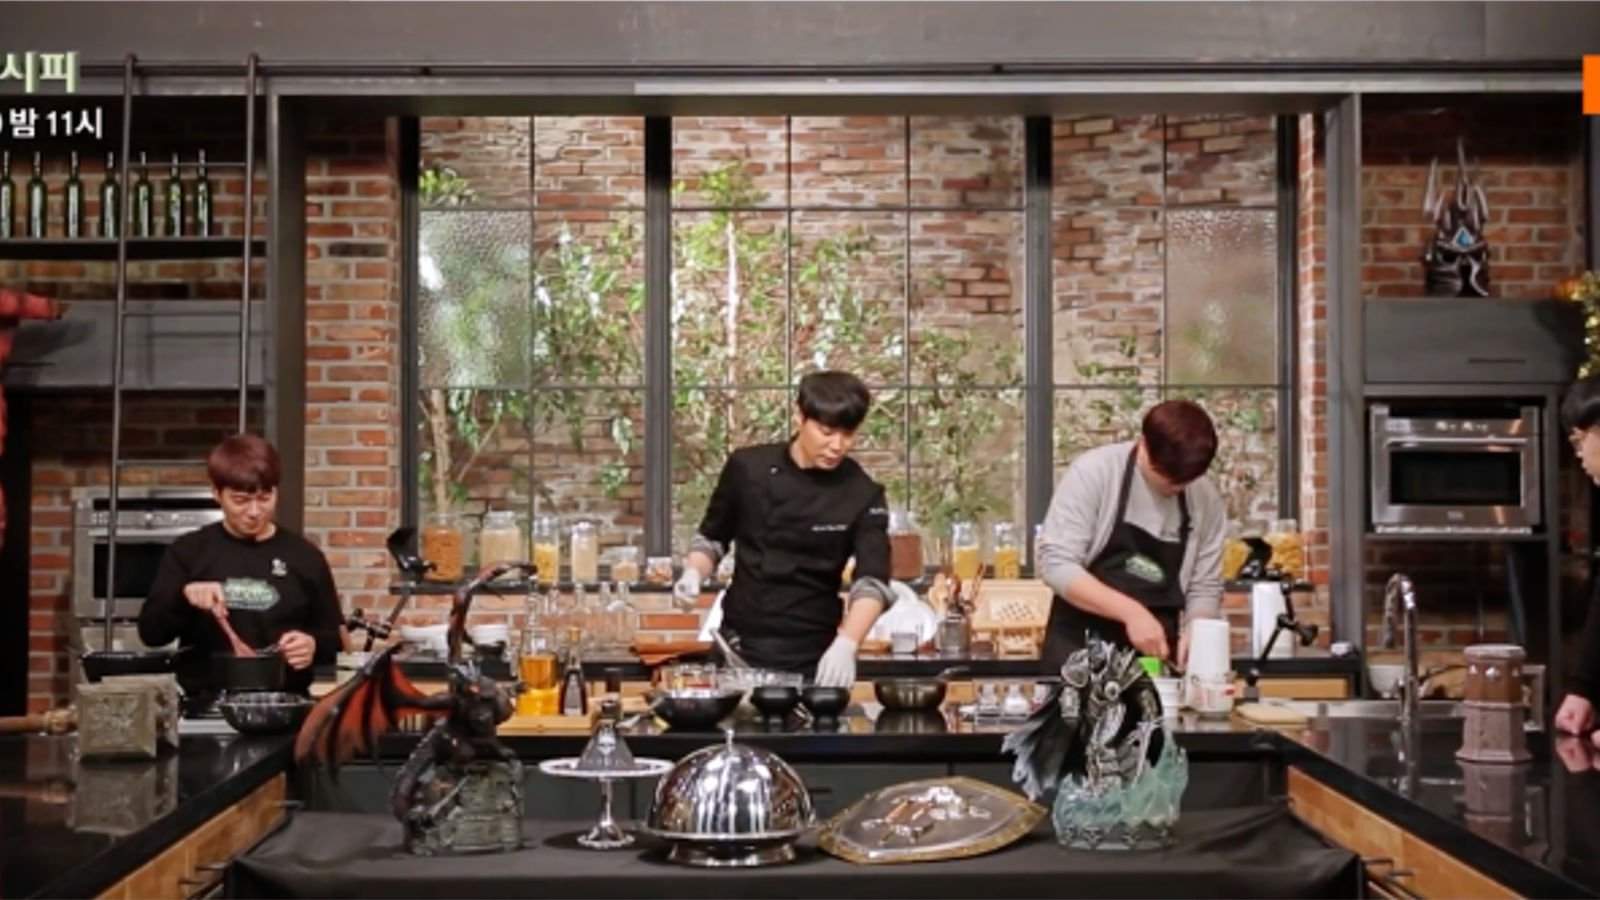 Vamers - Geekosphere - TV & Movies - This South Korean 'World of Warcraft' cooking show has nothing on JO - 02